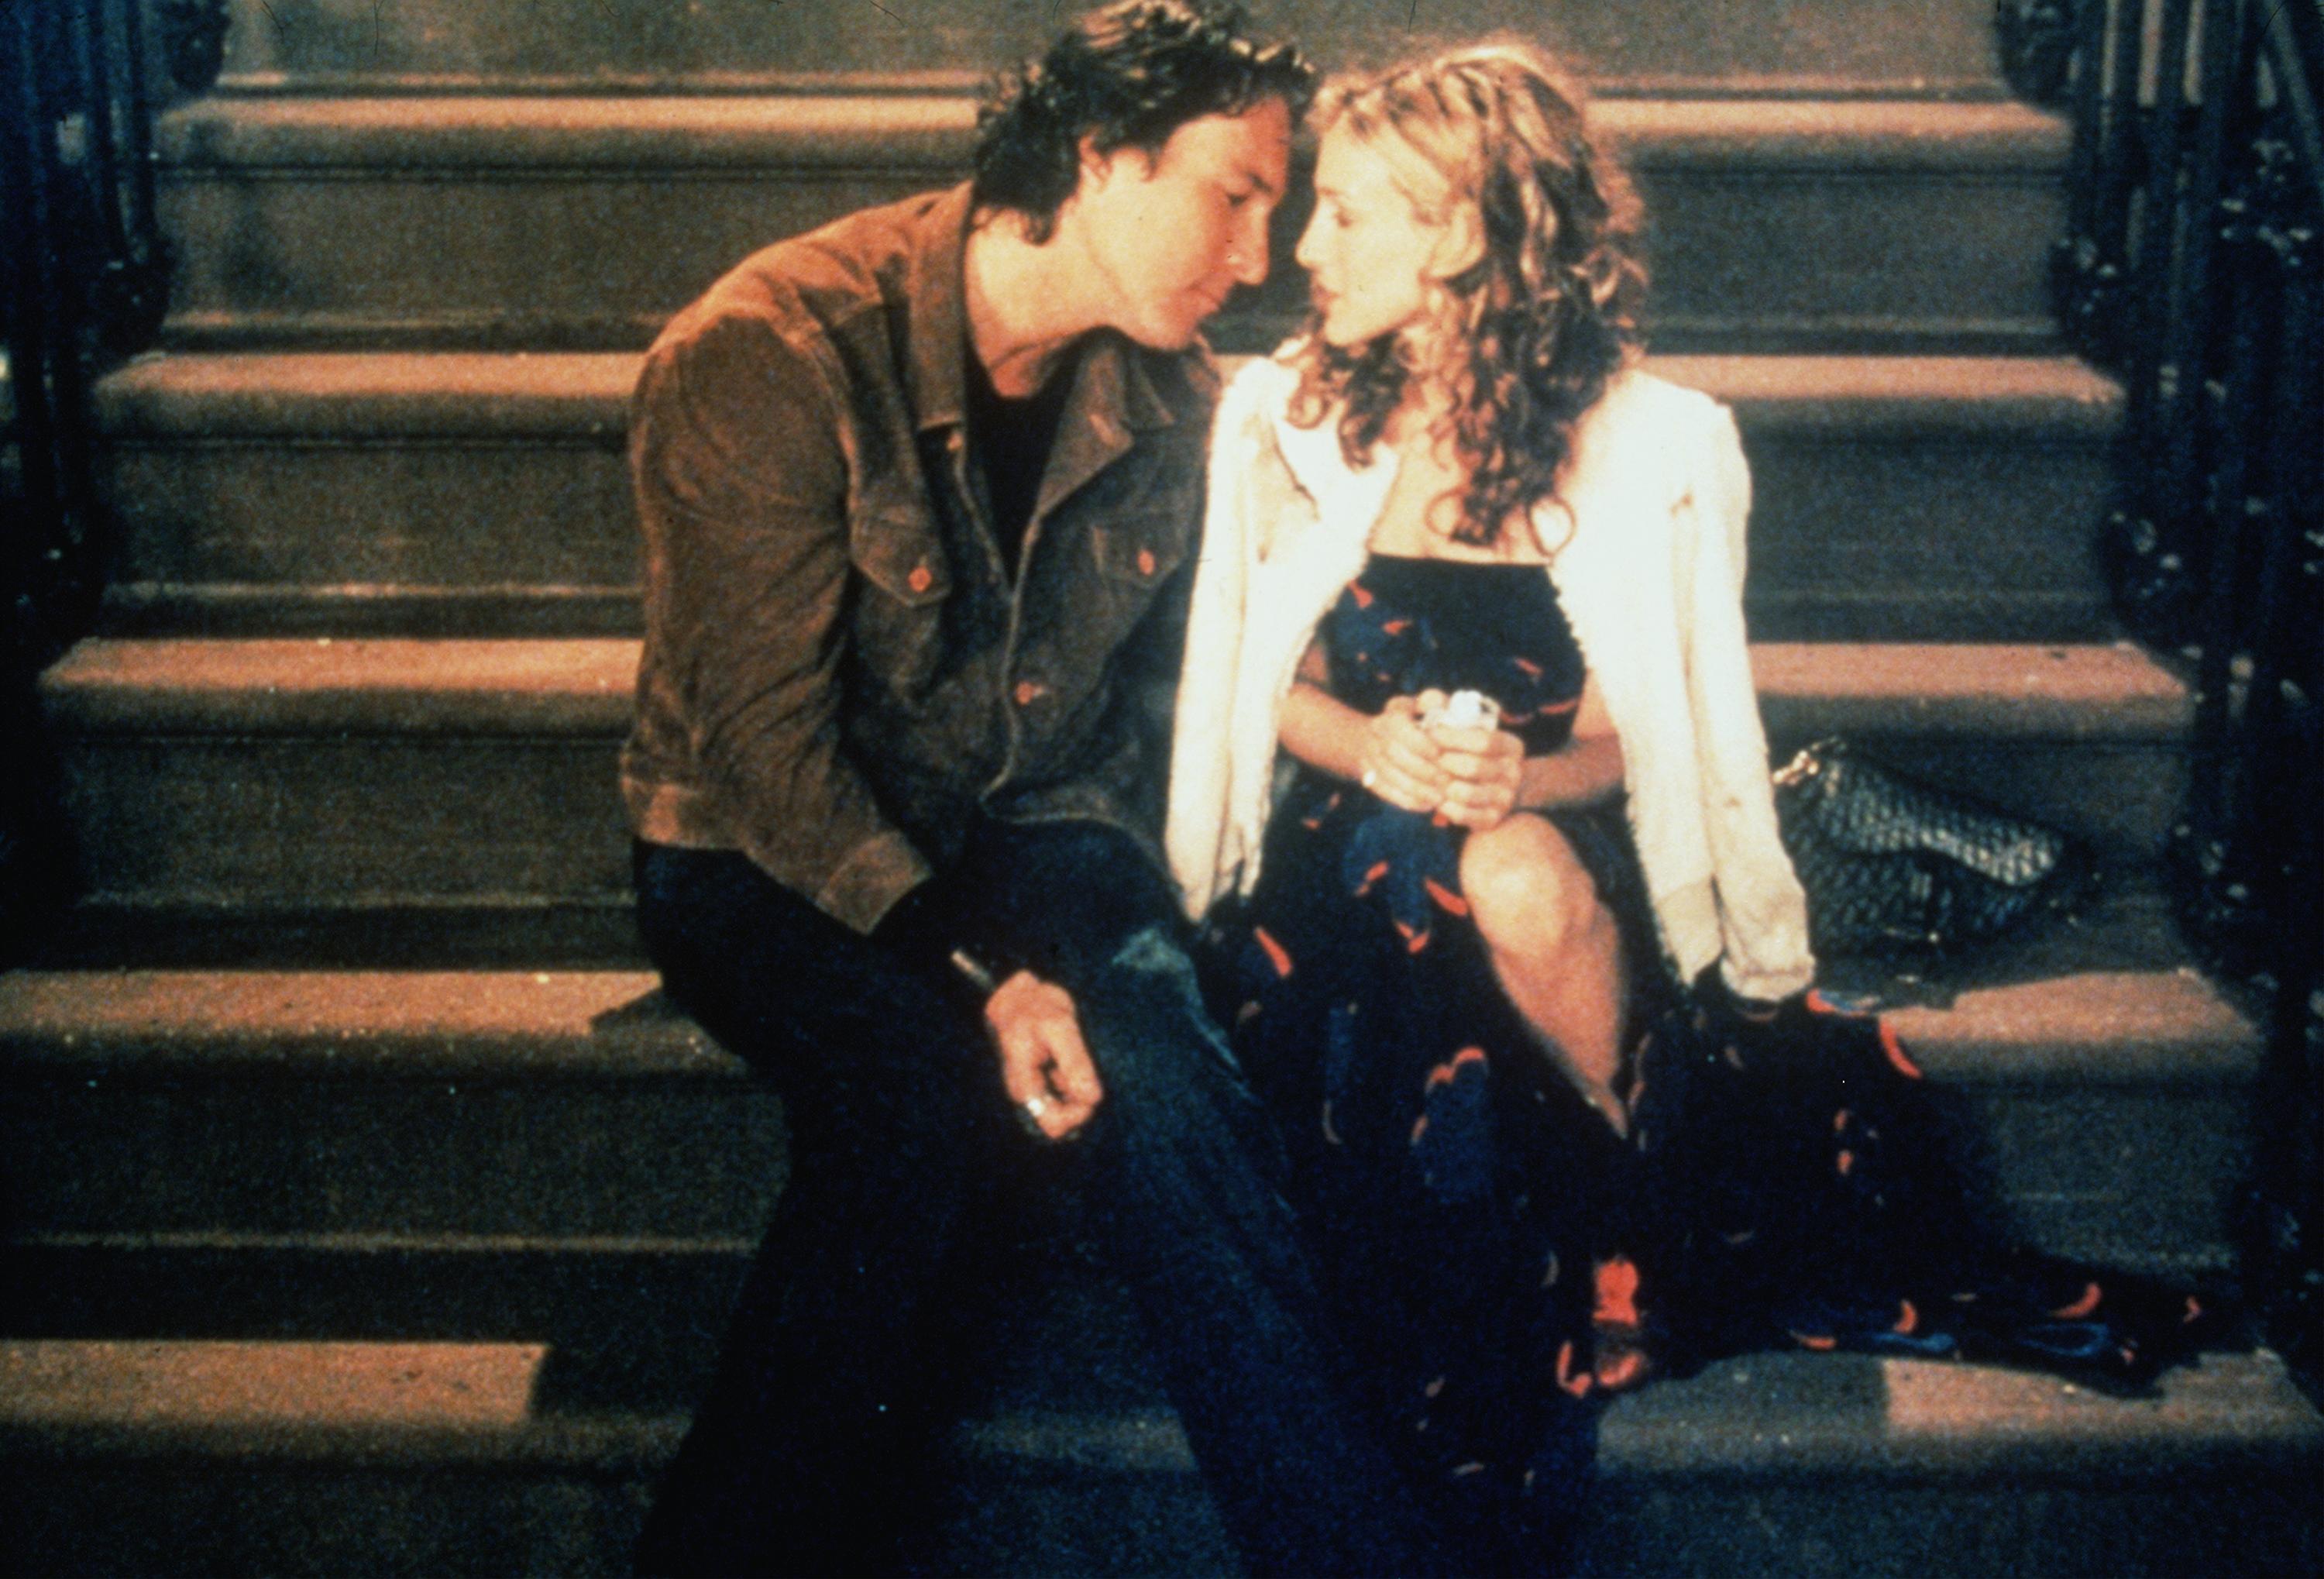 John Corbett as Aidan Shaw and Sarah Jessica Parker as Carrie Bradshaw sit on the steps of her New York City brownstone during the filming of 'Sex and the City'